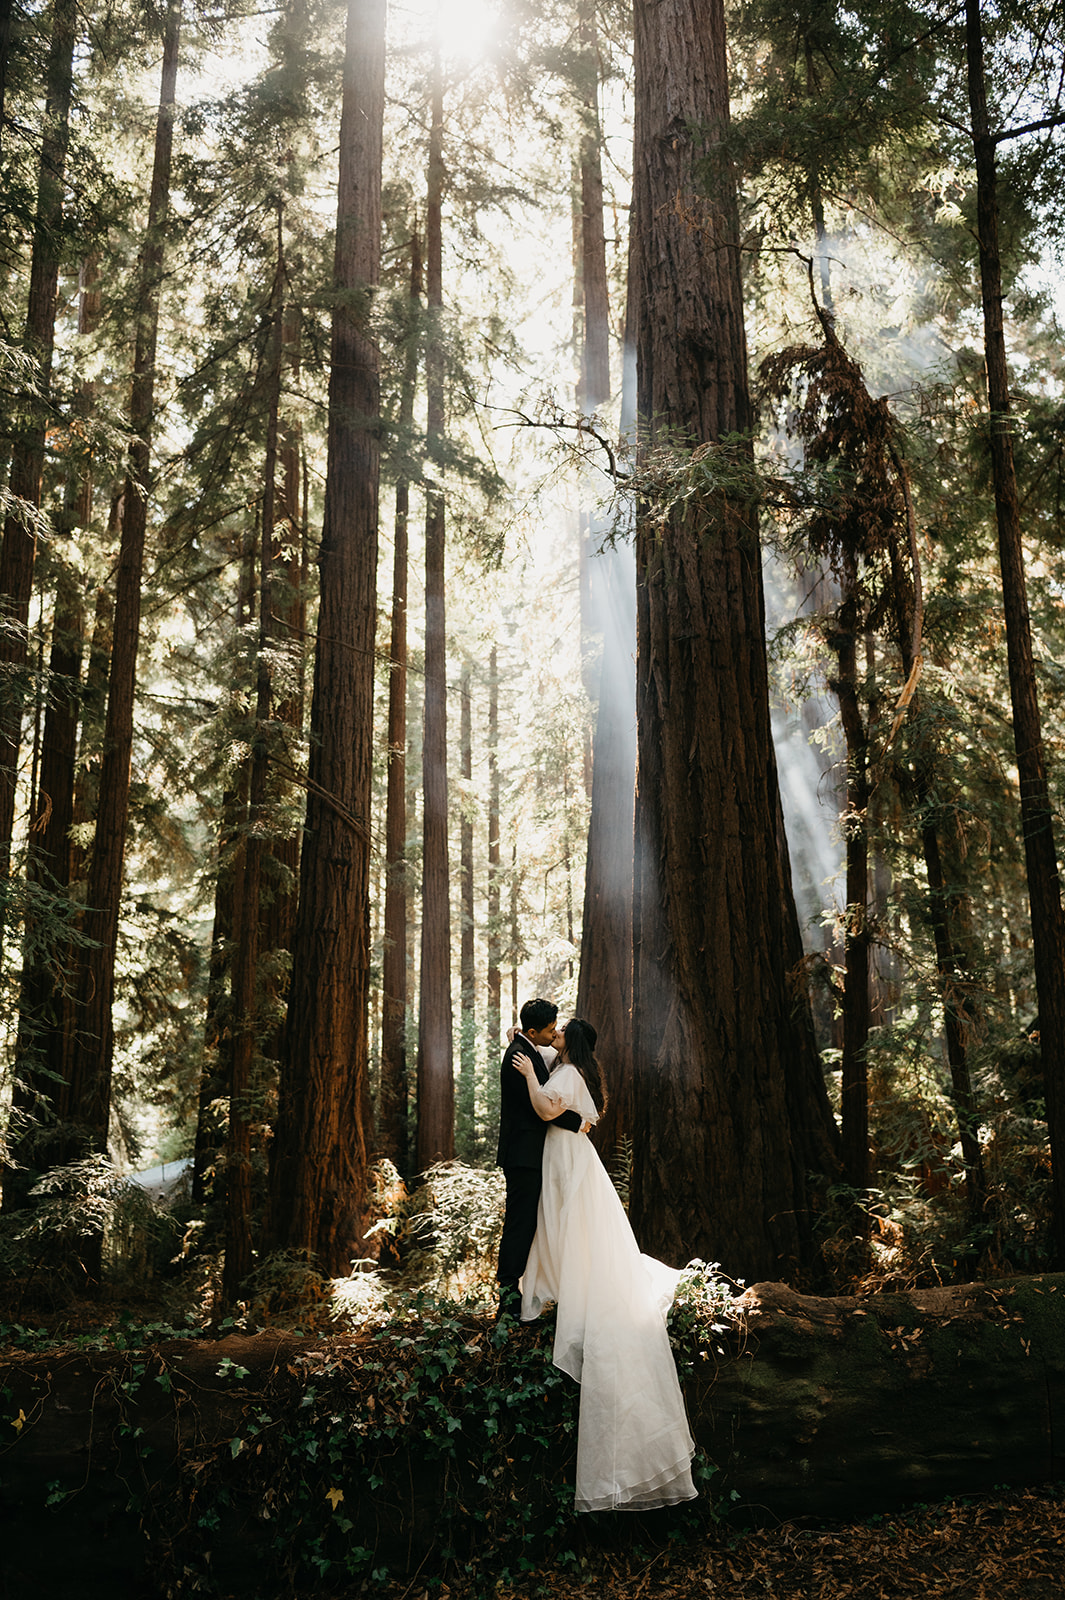 Redwood forest of Big Sur, bride and groom posing on a fallen redwood tree with ivy growing all around.